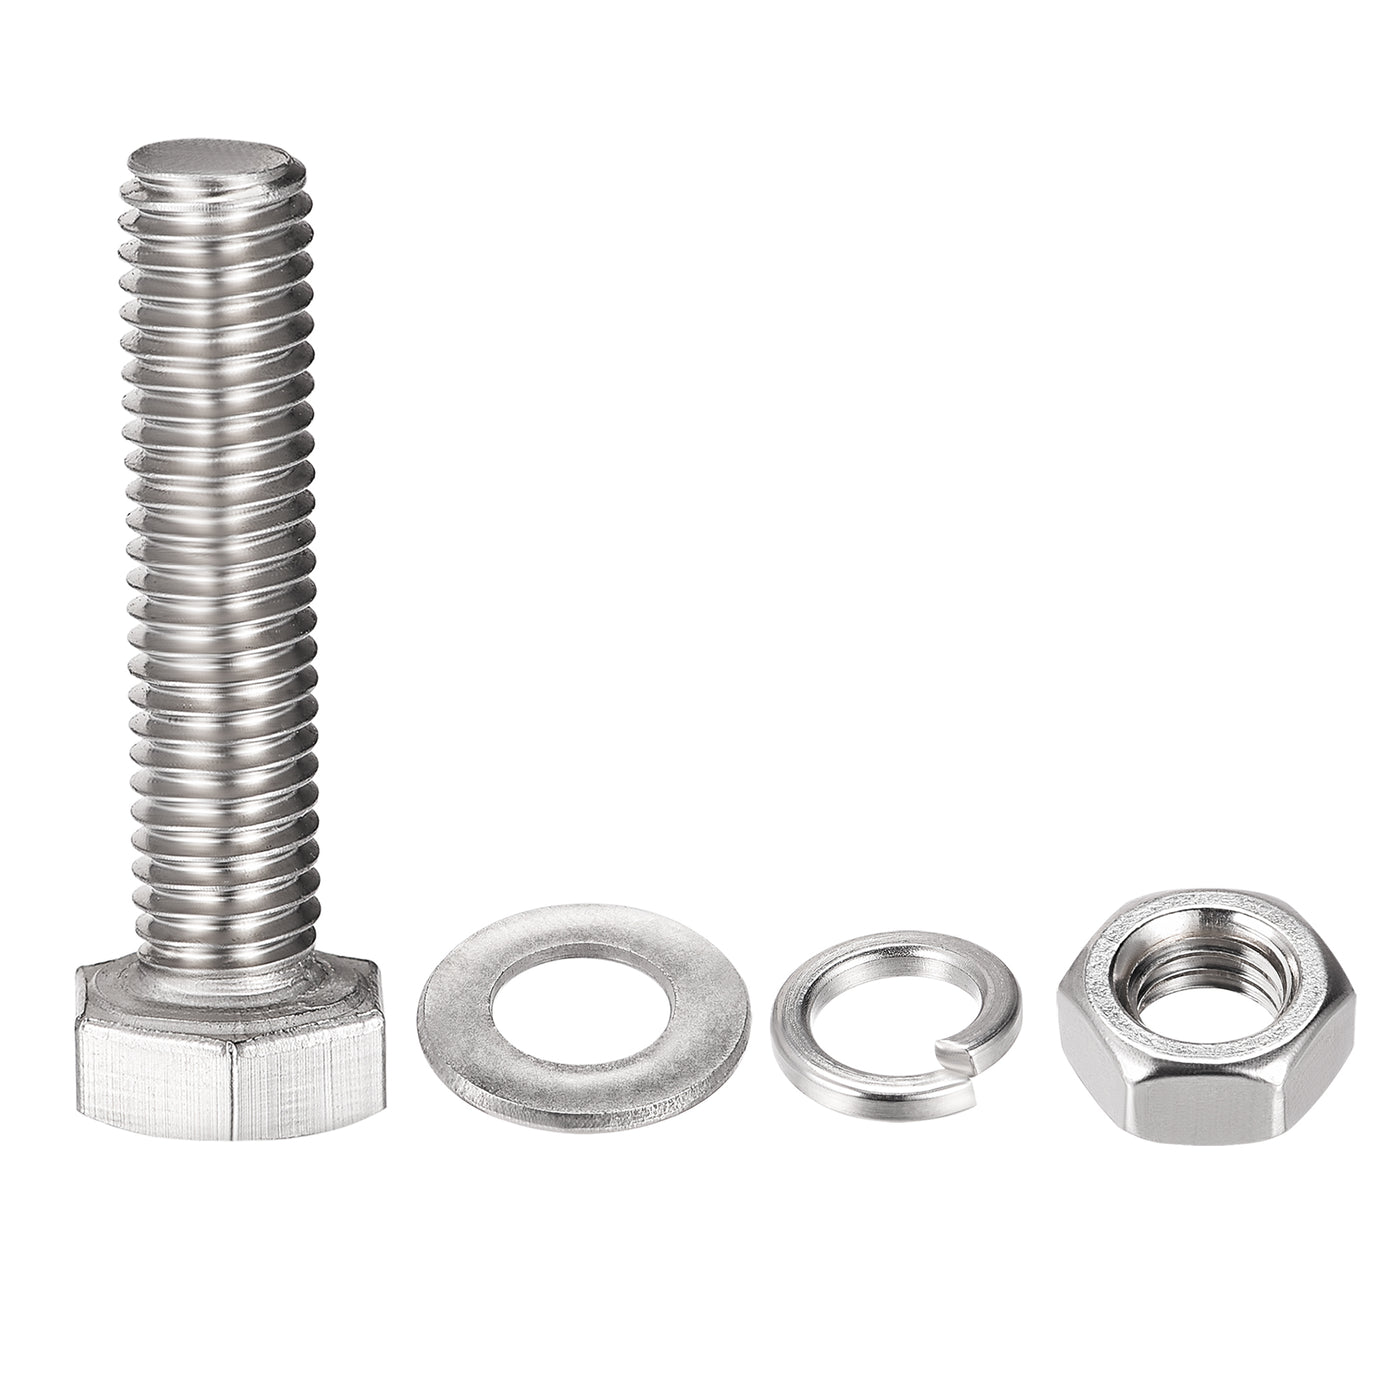 Uxcell Uxcell M8 x 35mm Hex Head Screws Bolts, Nuts, Flat & Lock Washers Kits, 304 Stainless Steel Fully Thread Hexagon Bolts 6 Sets